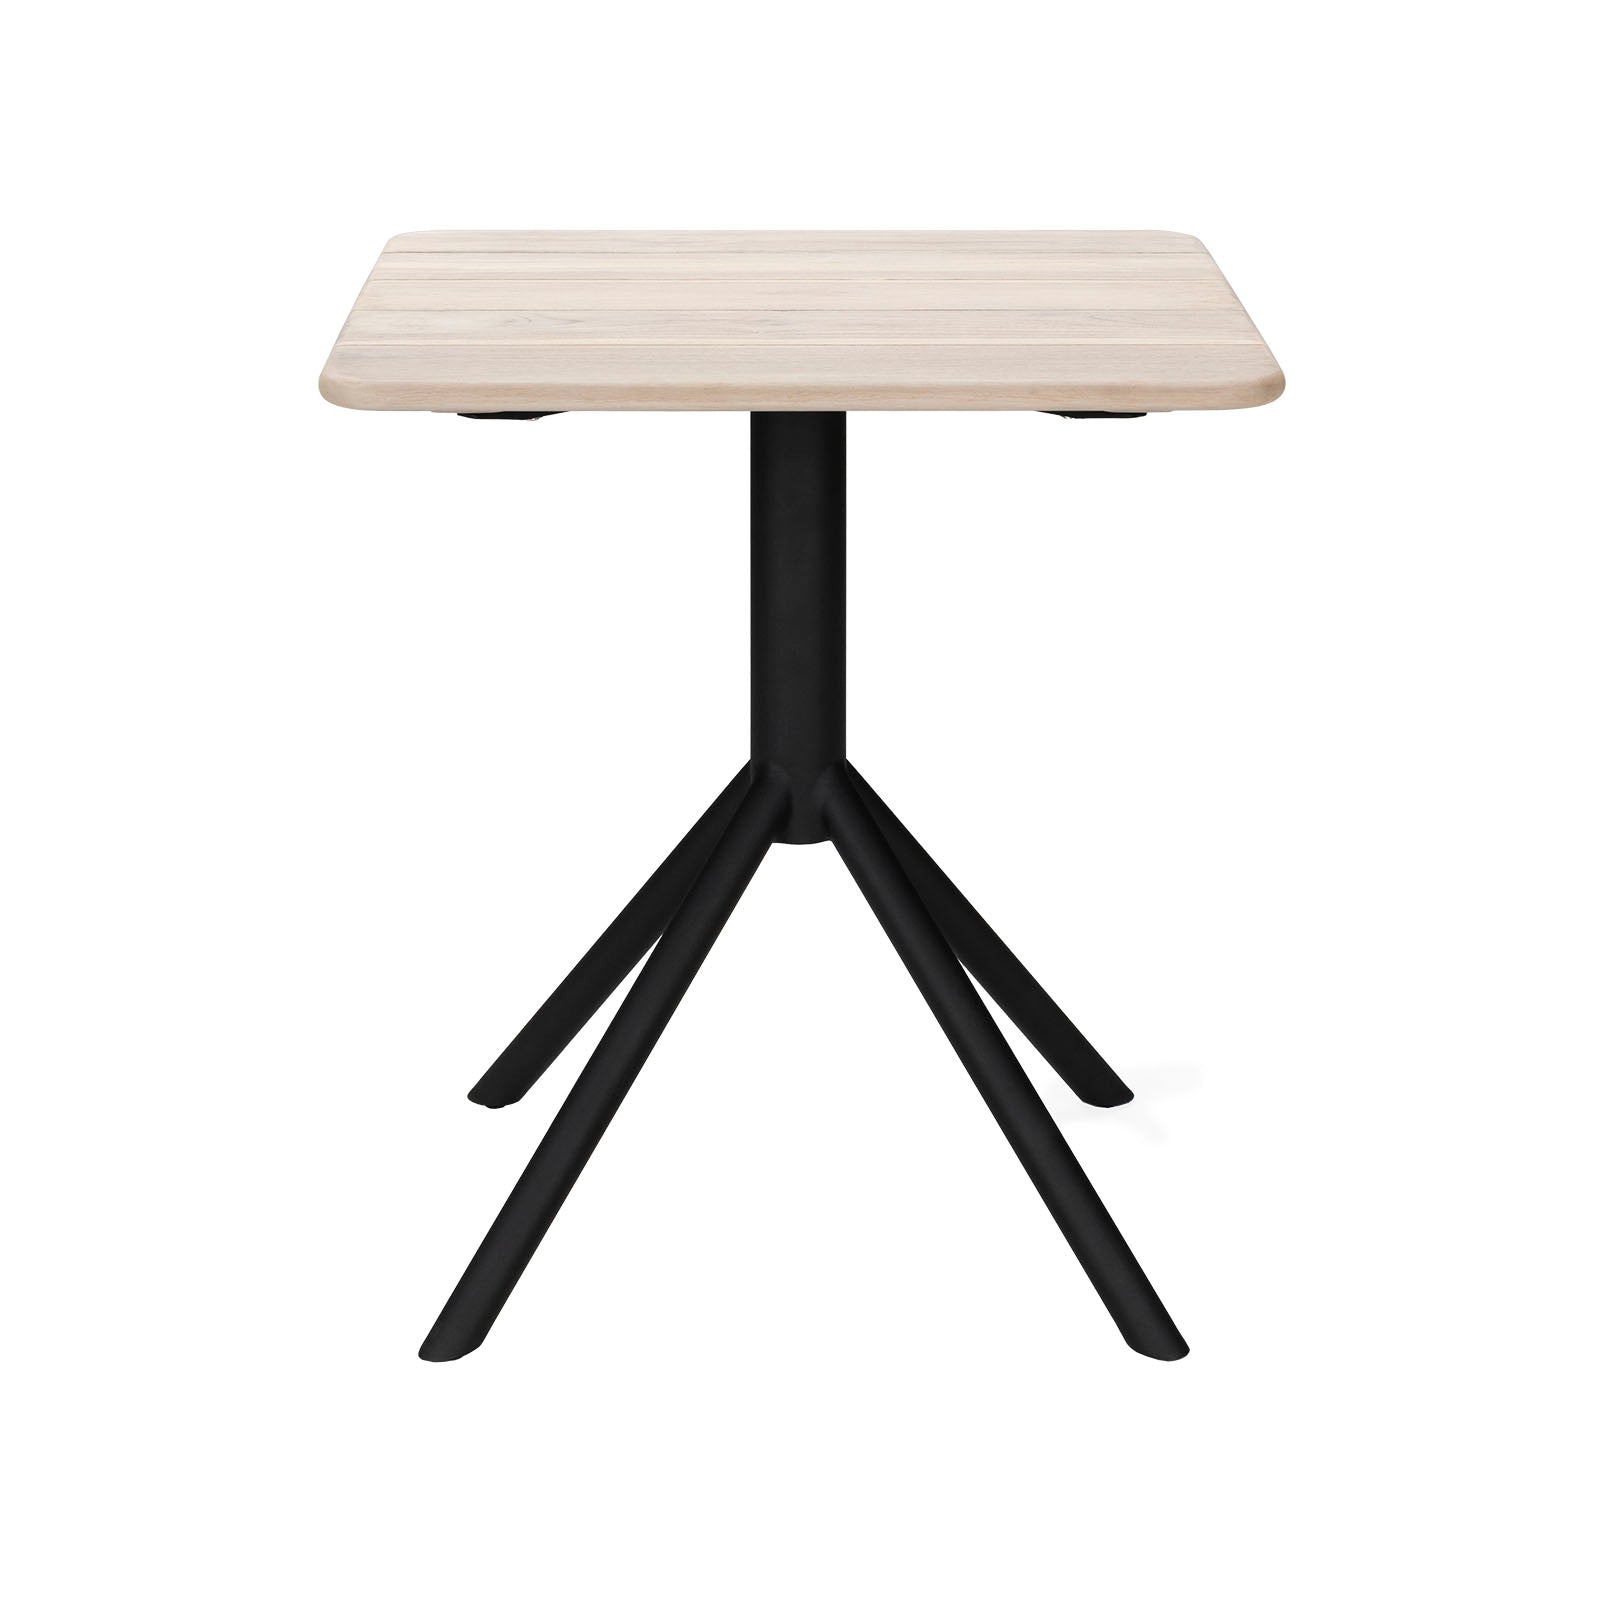 Andy Square Reclaimed Teak Bistro Table